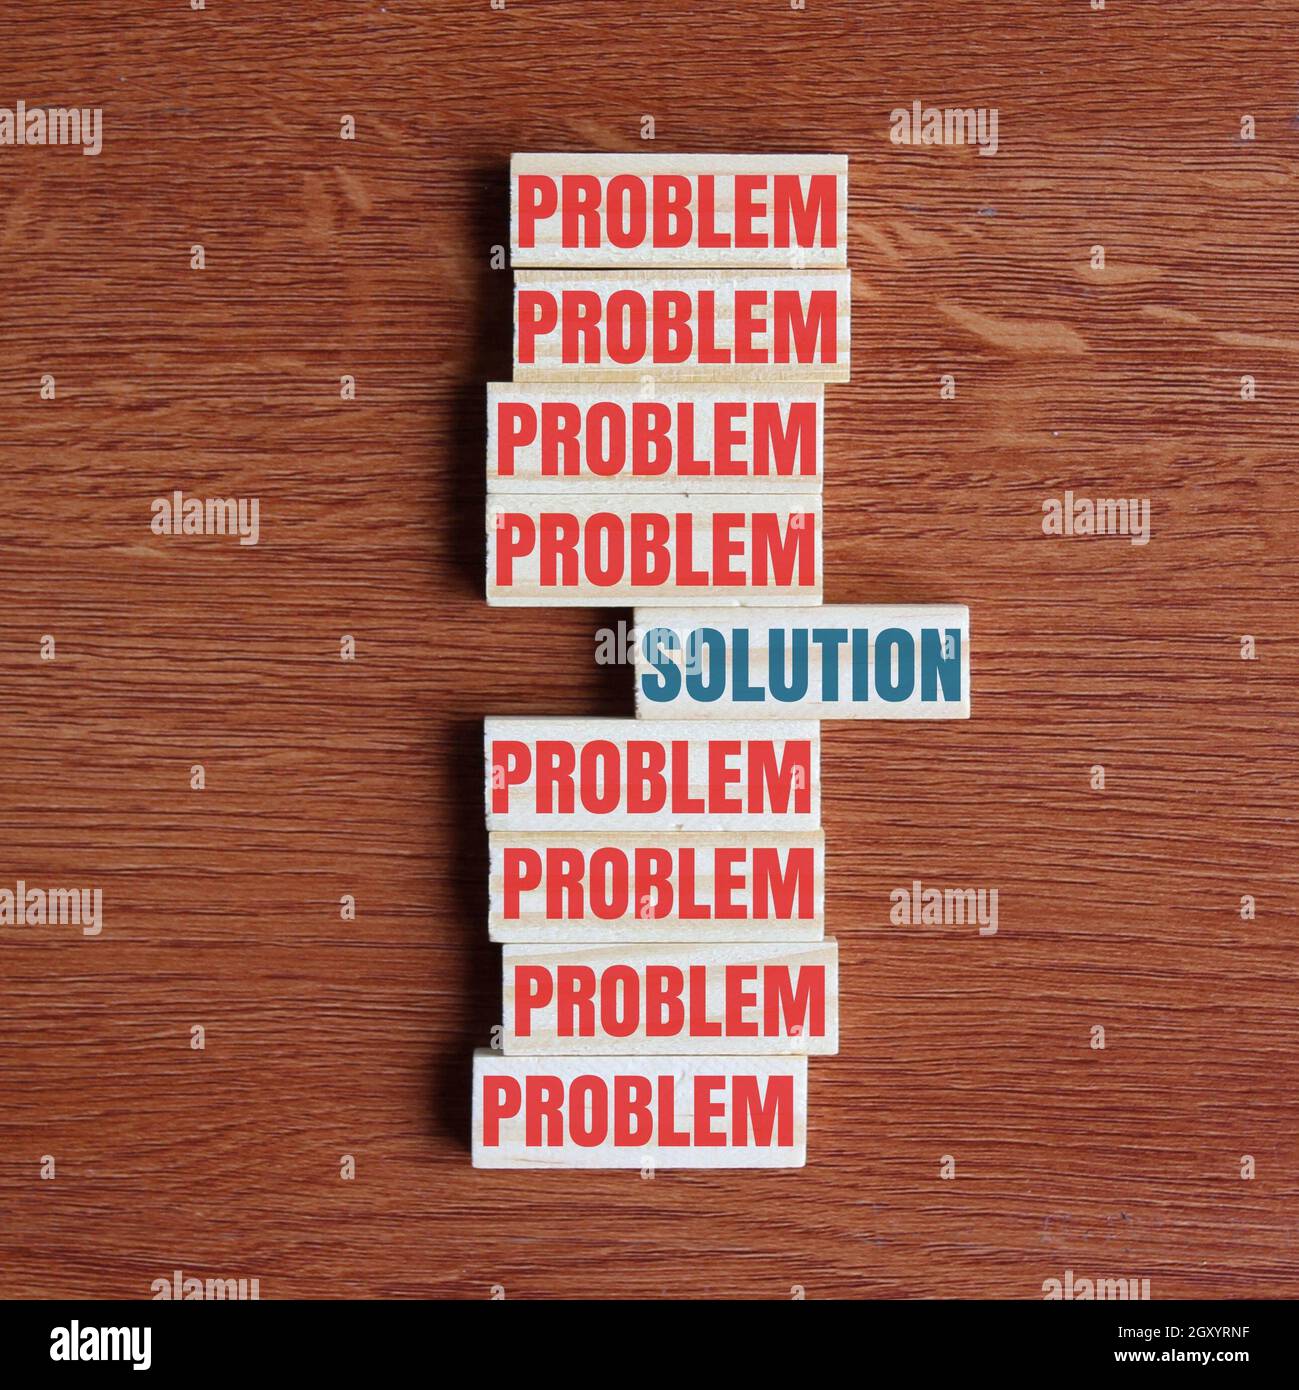 Concept of problem solving. Look for the solution inside the problem. Top view of wooden tiles with text PROBLEM and SOLUTION Stock Photo